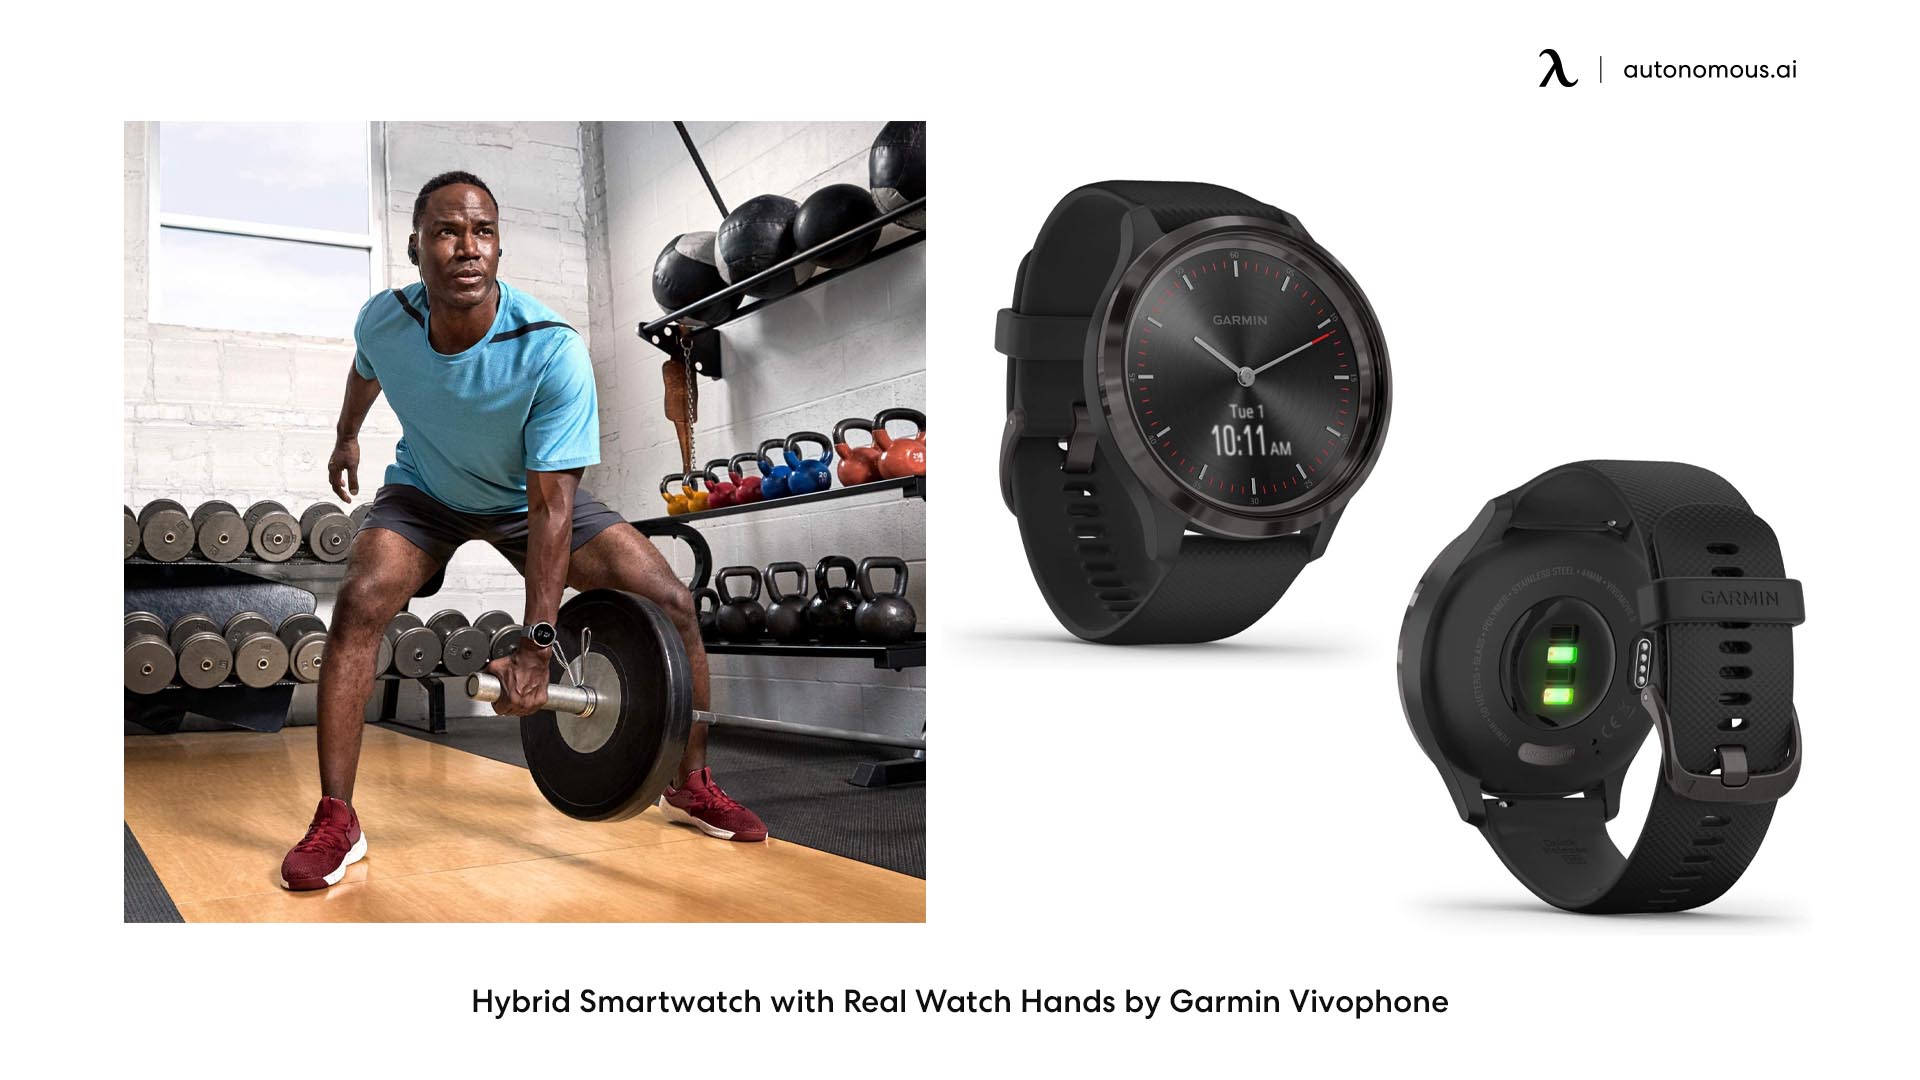 Hybrid Smartwatch with Real Watch Hands by Garmin Vivophone